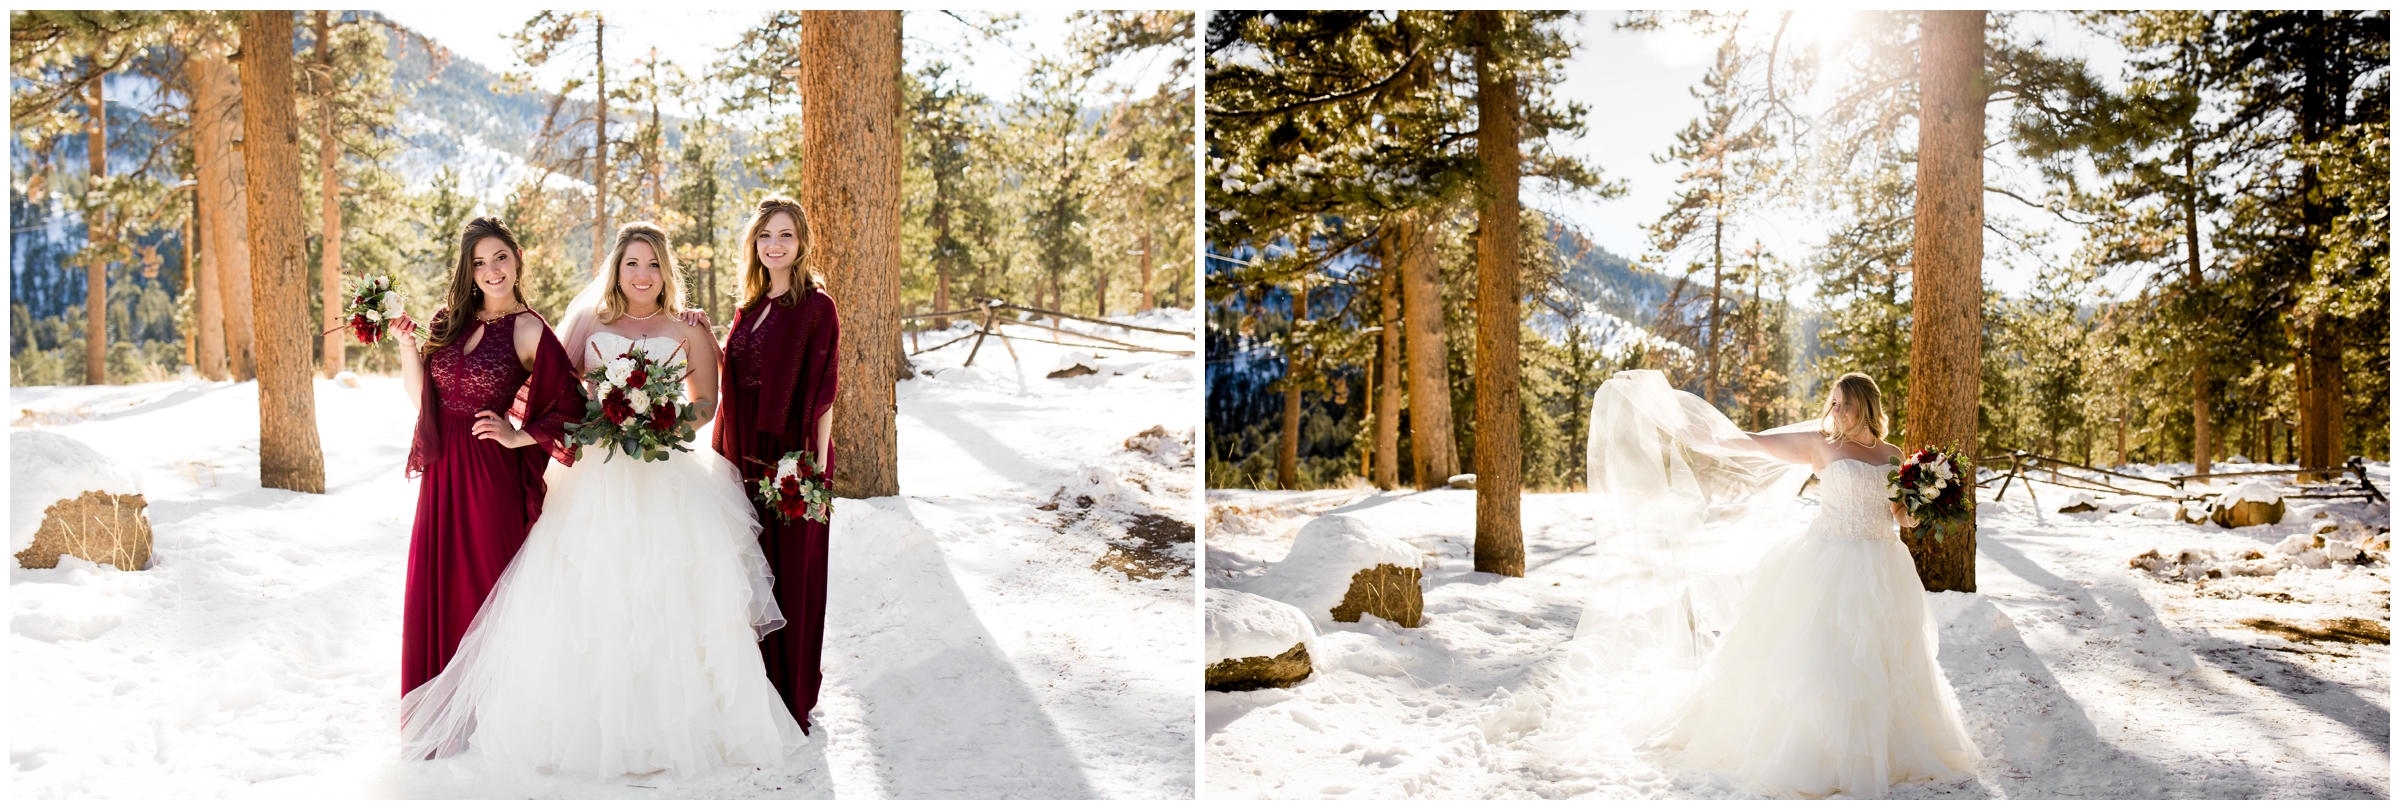 bridesmaids in red dresses in snow at Colorado winter wedding pictures 